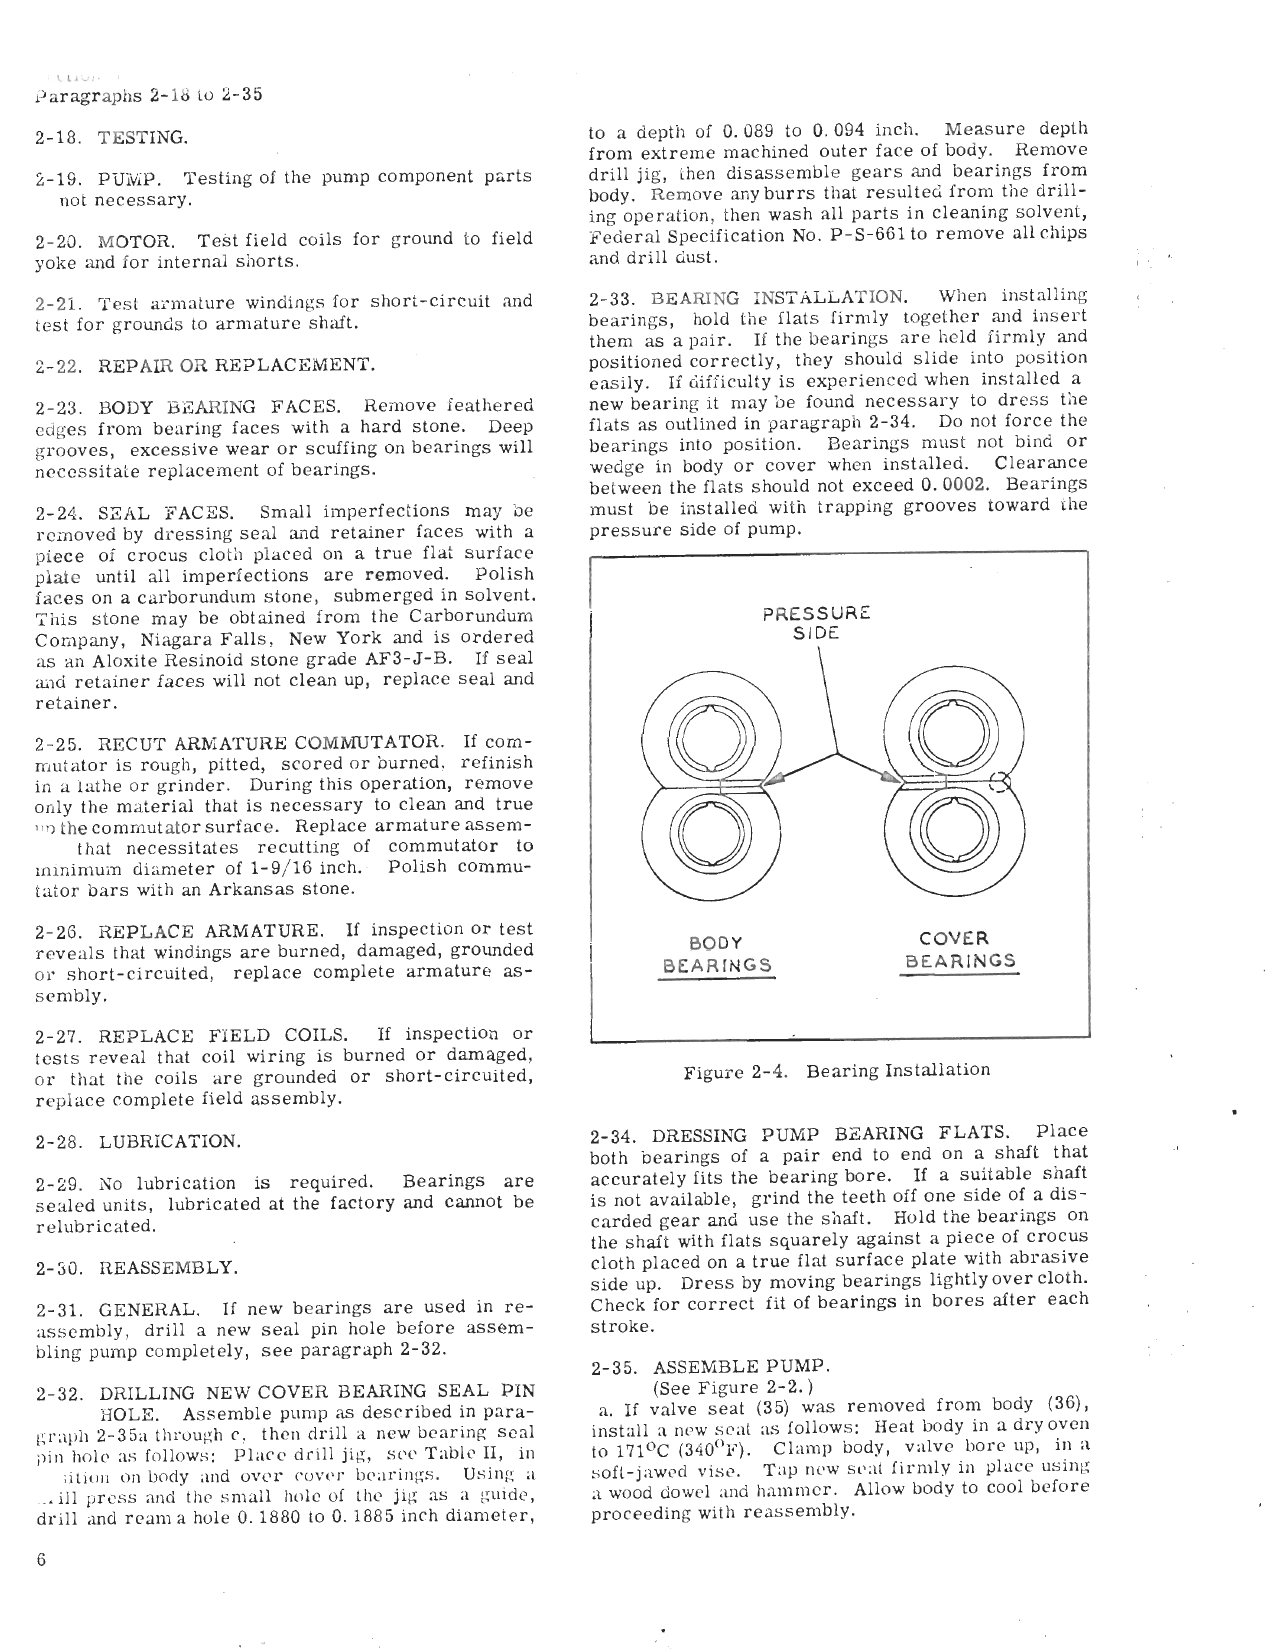 Sample page 9 from AirCorps Library document: Overhaul Instructions for Electric Motor Driven Hydraulic Gear Type Pump - Model 1E-777 Series